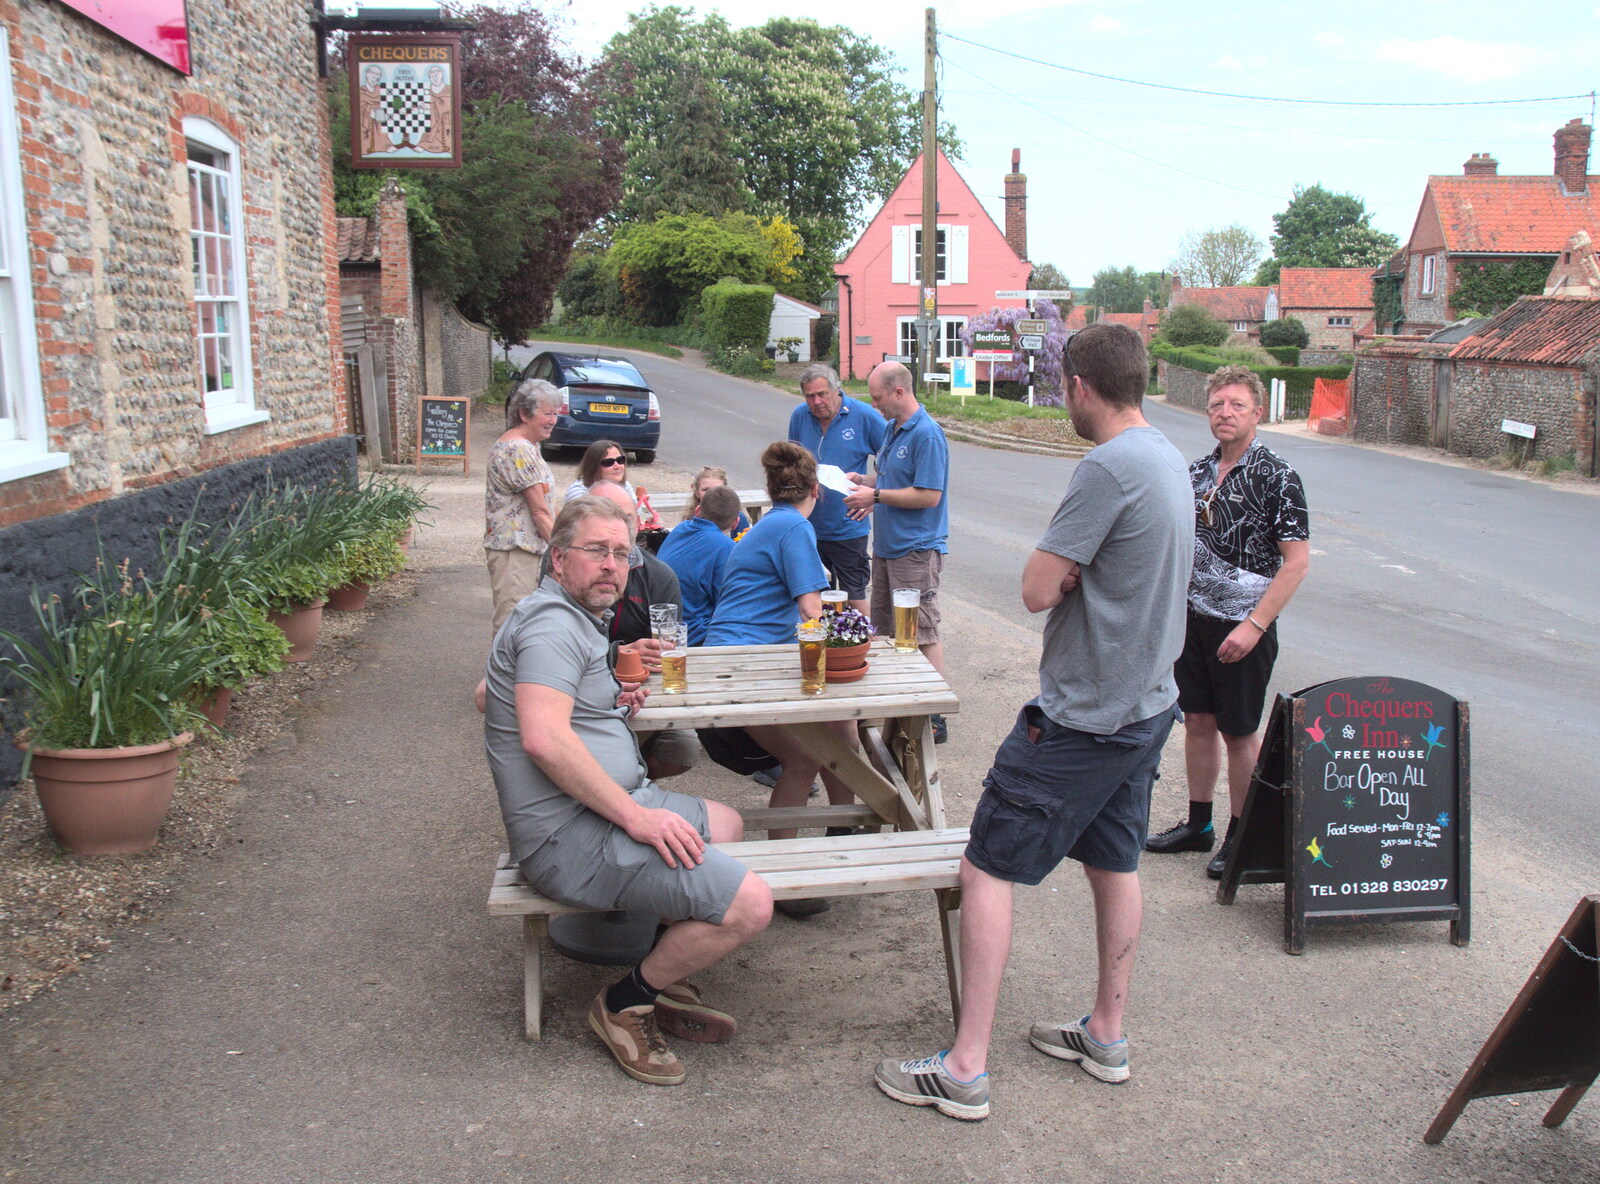 The lunch pub: The Chequers Inn, Binham from The BSCC Weekend Away, Holt, Norfolk - 12th May 2018